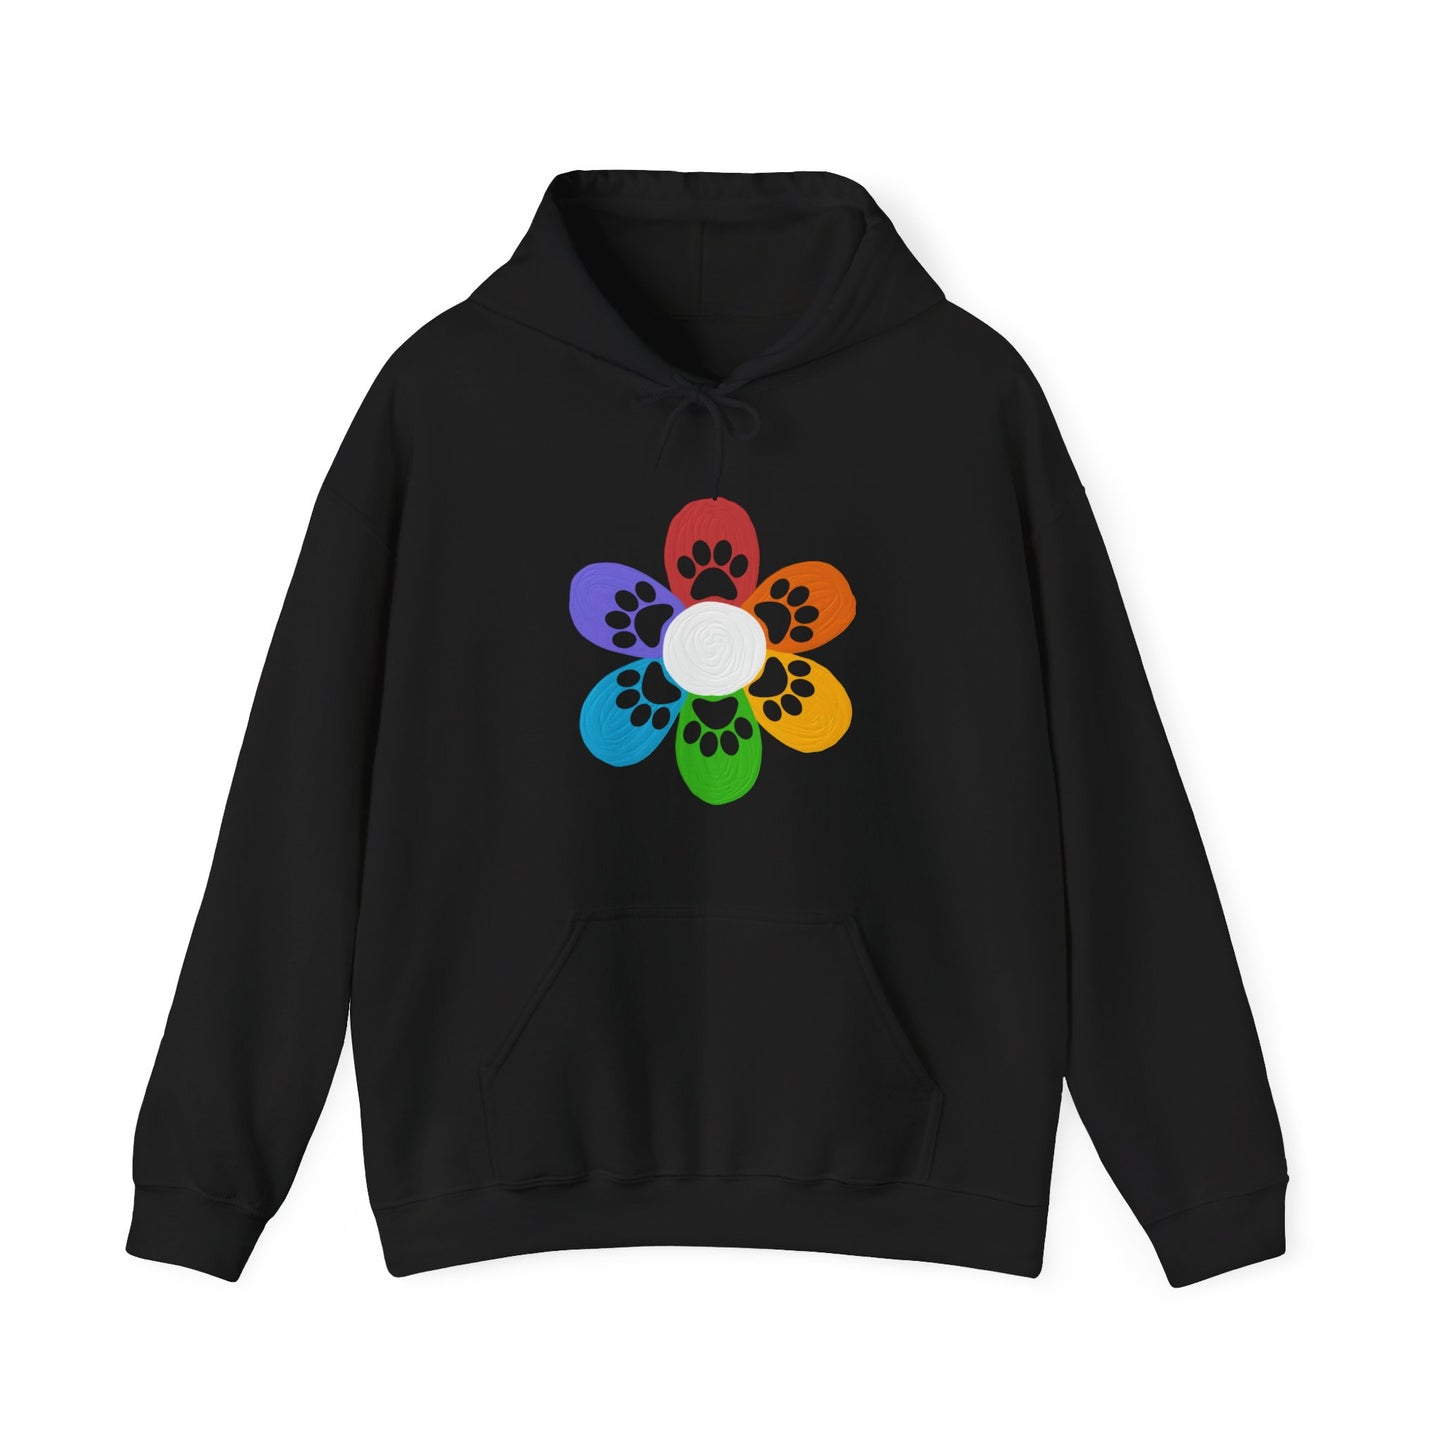 Against a white backdrop is a black Dogs Pure Love hoodie displaying a colorful flower and dog paw print.